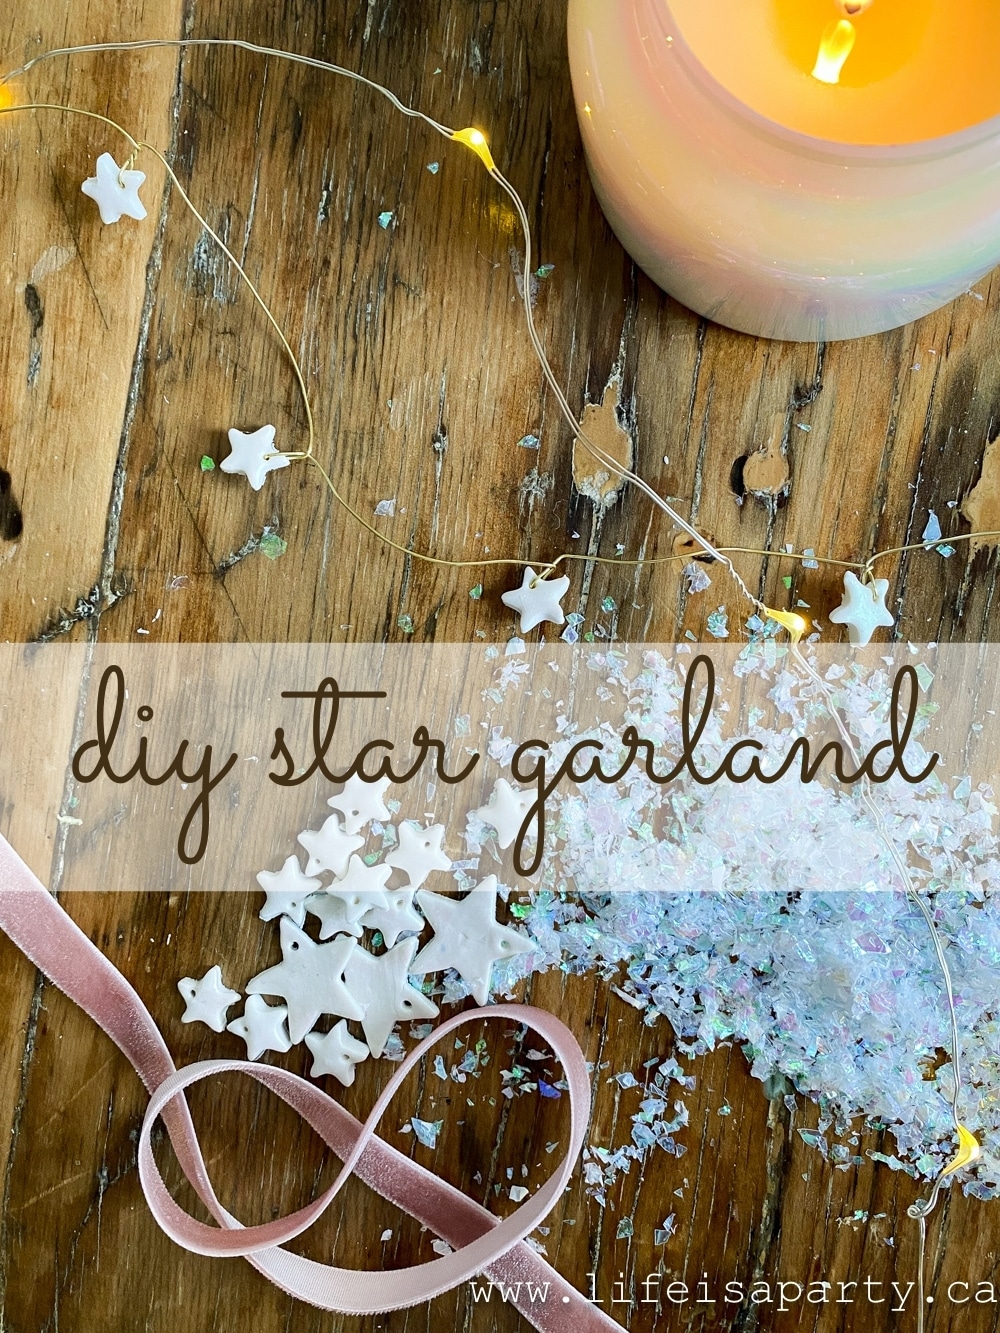 DIY Star Garland: easy craft using polymer clay and gold wire to create beautiful star garland for Christmas decorating.